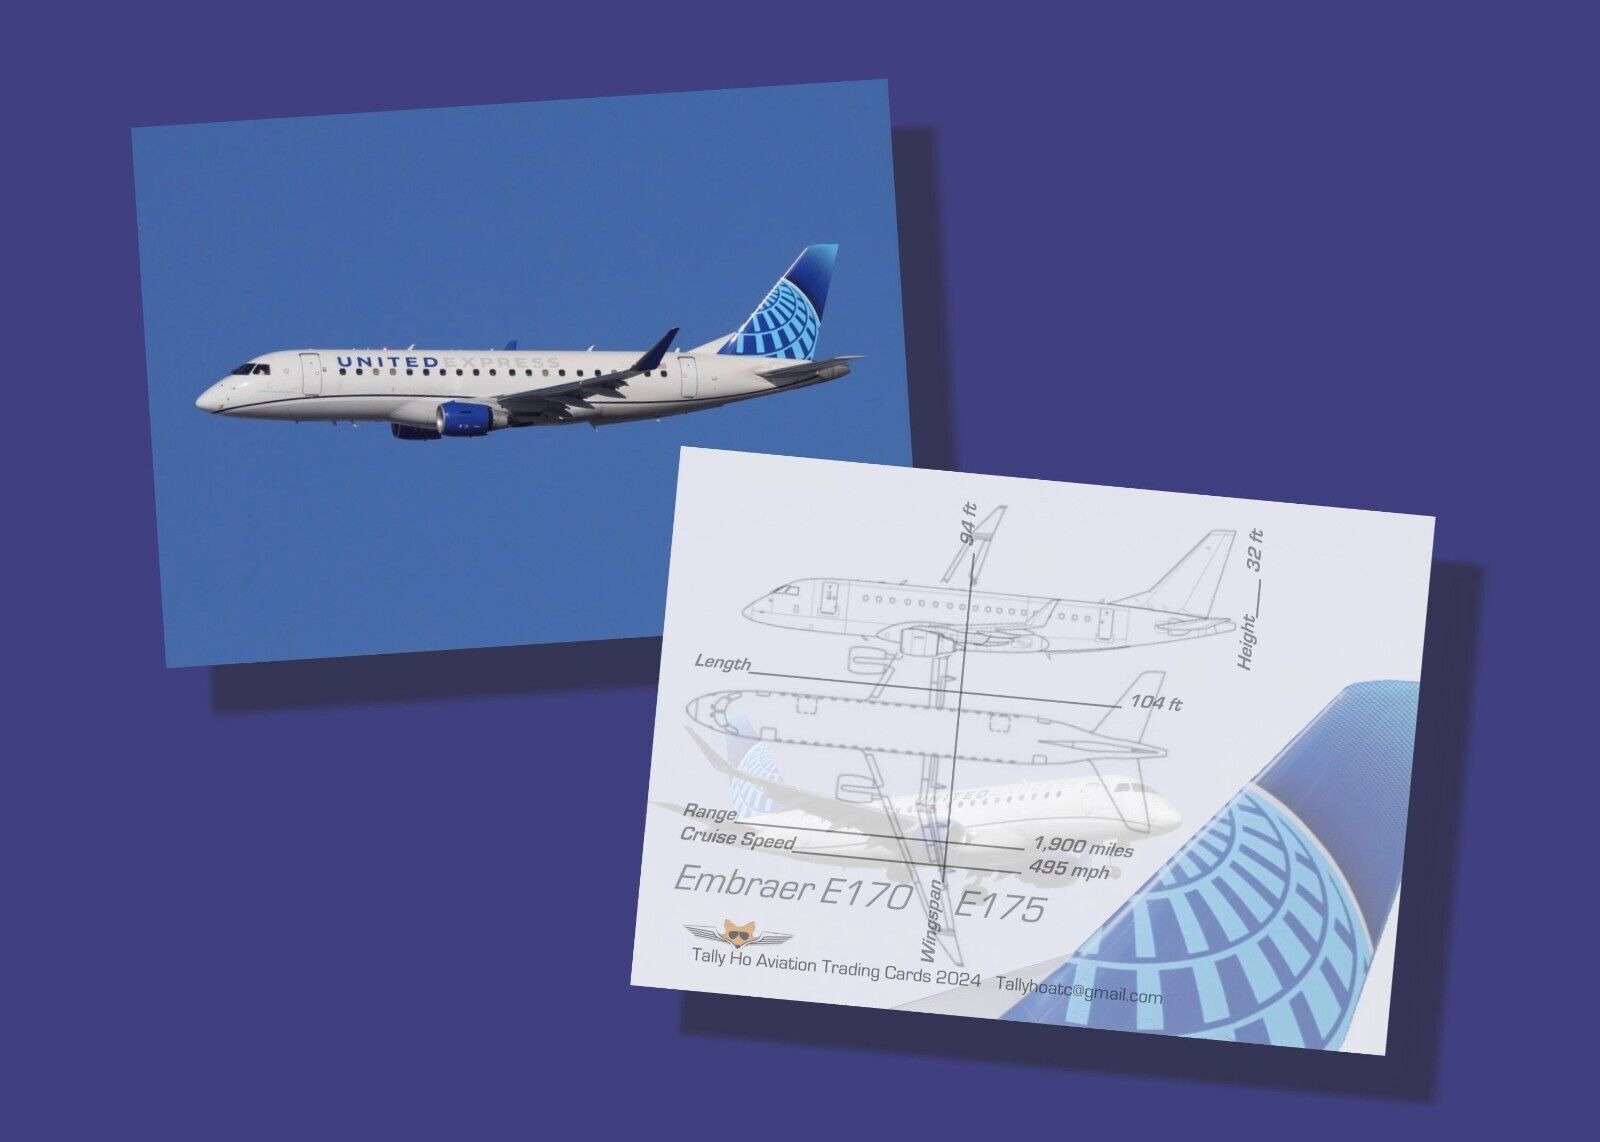 United Express Embraer 170 175 - Set of 25 - Airplane Trading Card 